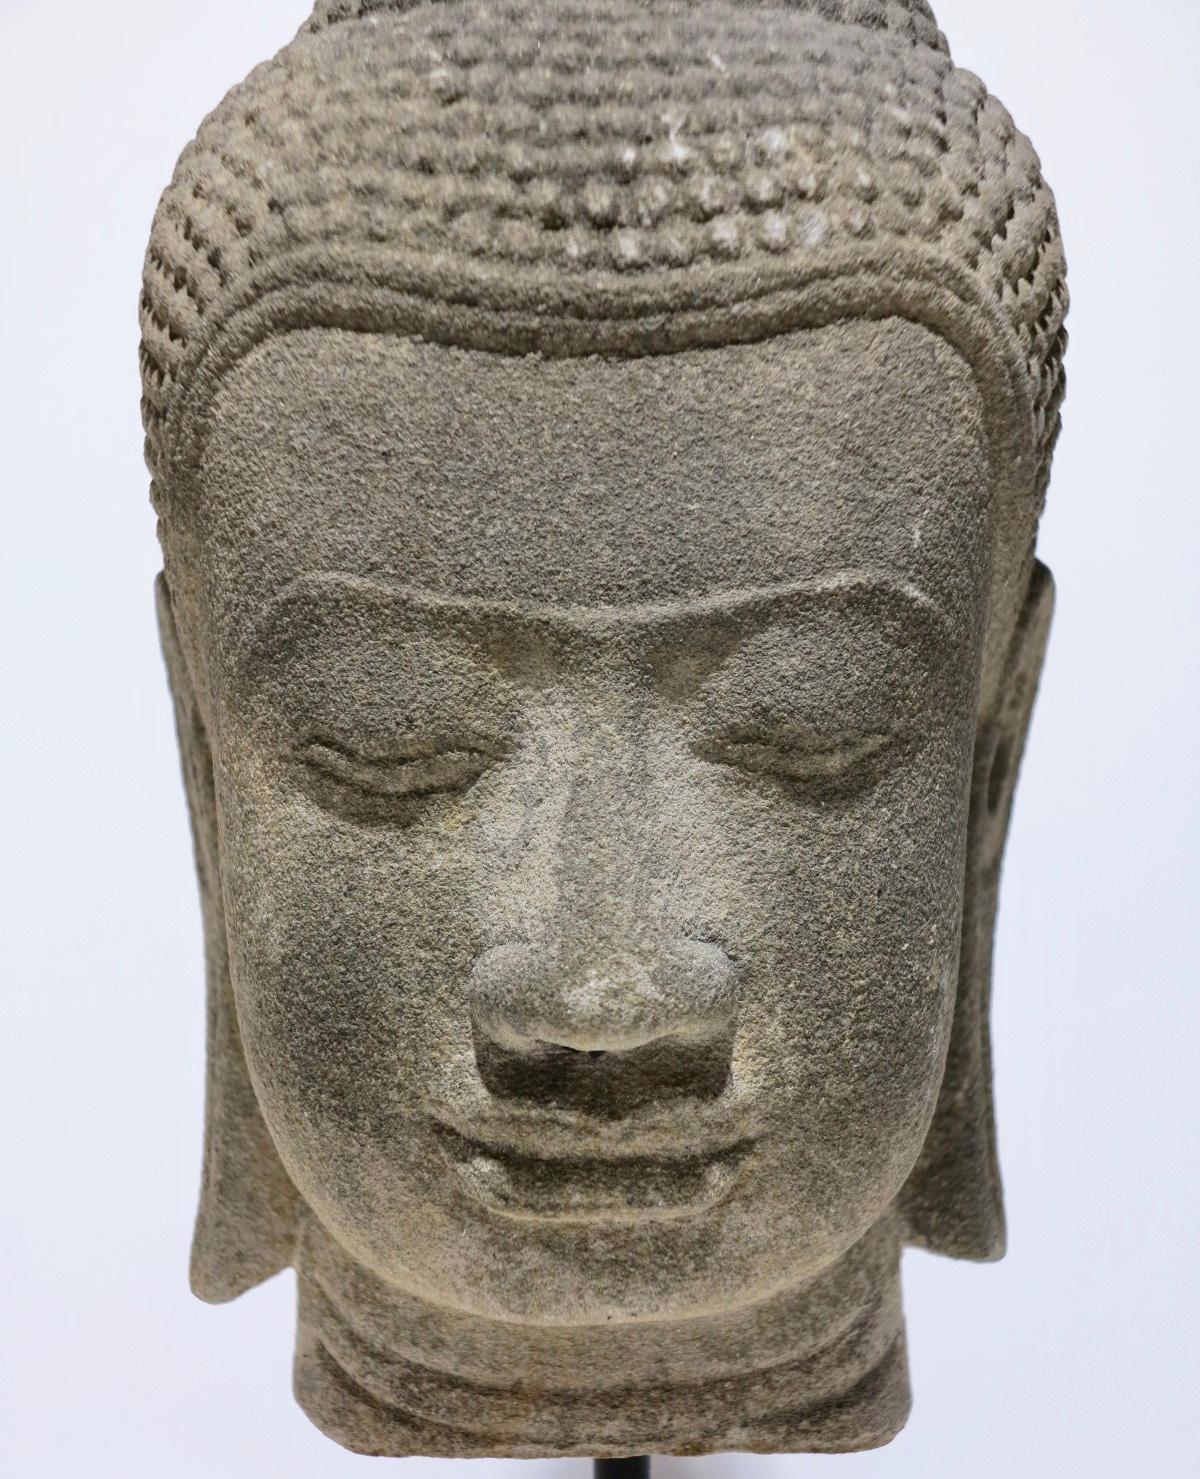 Beautiful Khmer head of Buddha. Angkor period, style of the post-Bayon. 14th century. Carved sandstone. Height 12 5/8 inches, width 5 5/8 inches, profile 5 7/8 inches. Measures 15 5/8 inches tall with stand. No conservation. 